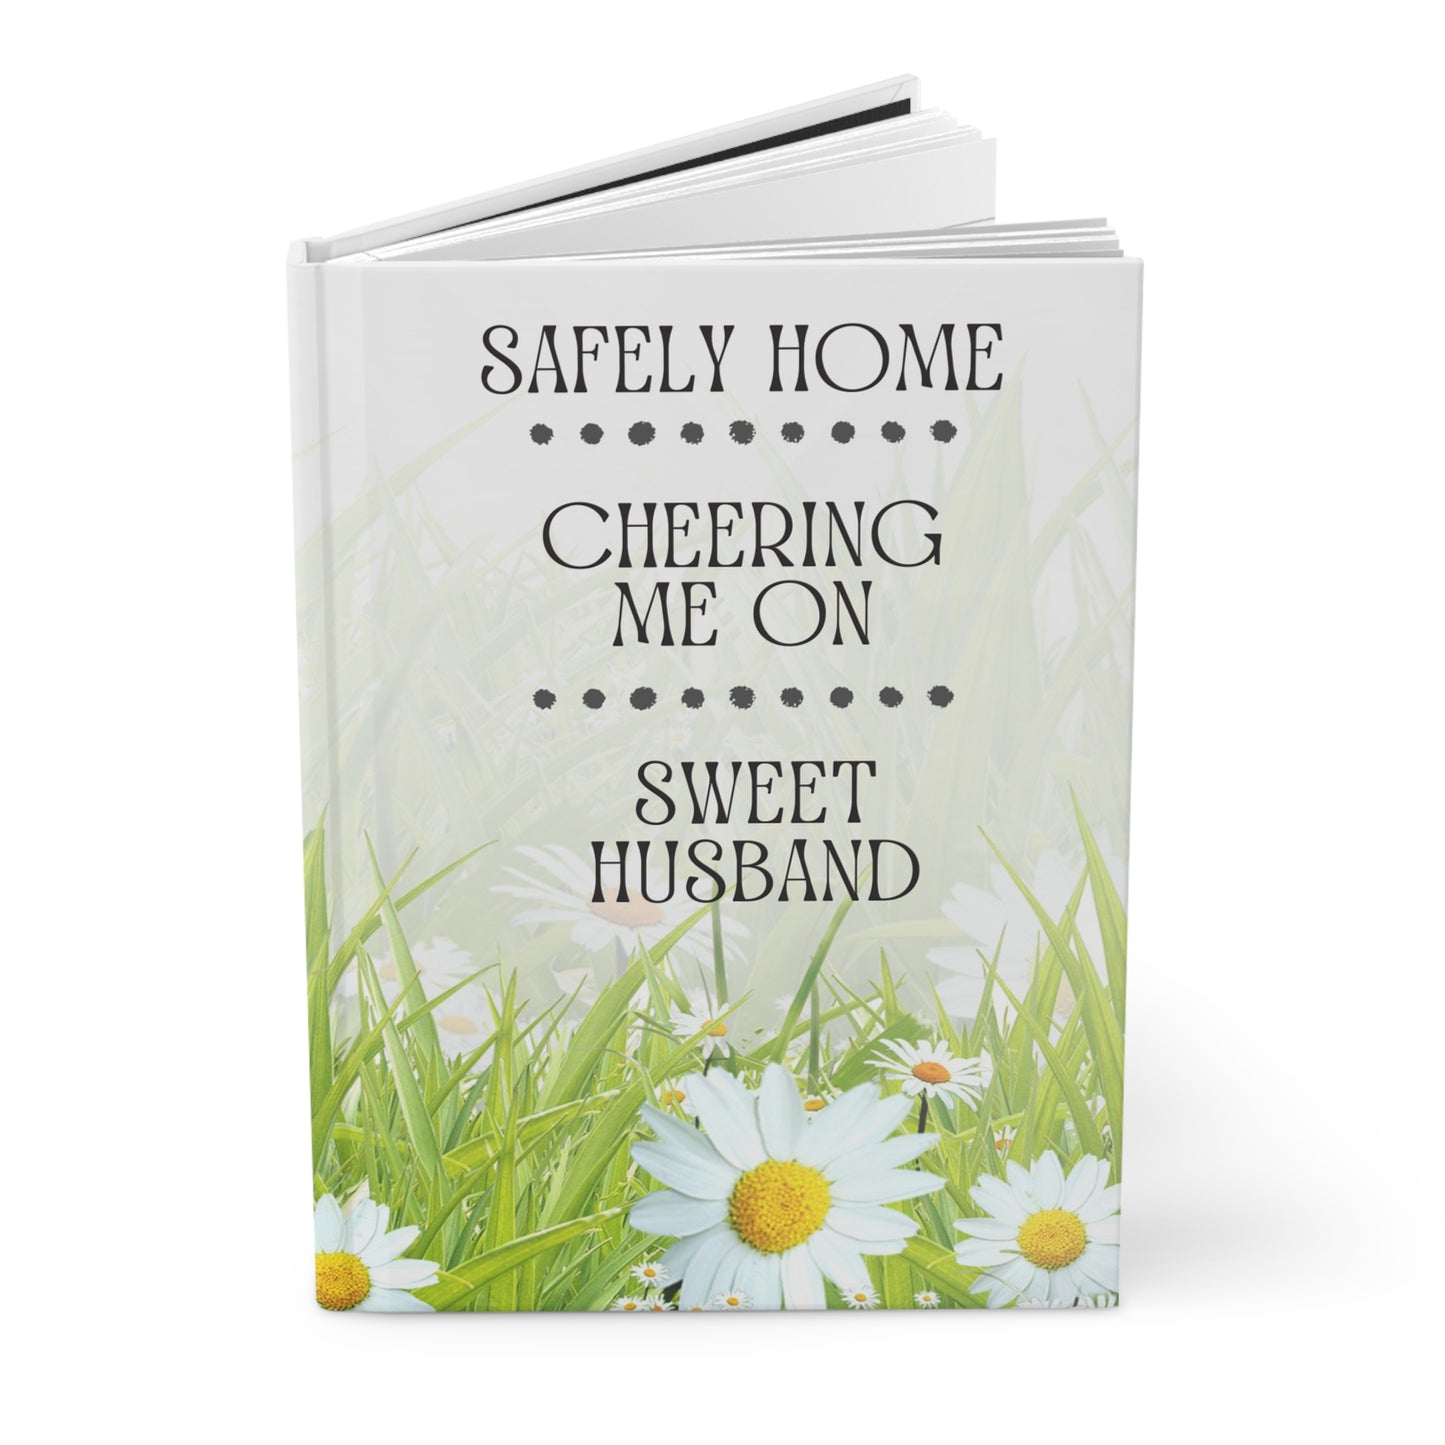 Grief Journal for Loss of Husband, Safely Home Cheering Me On